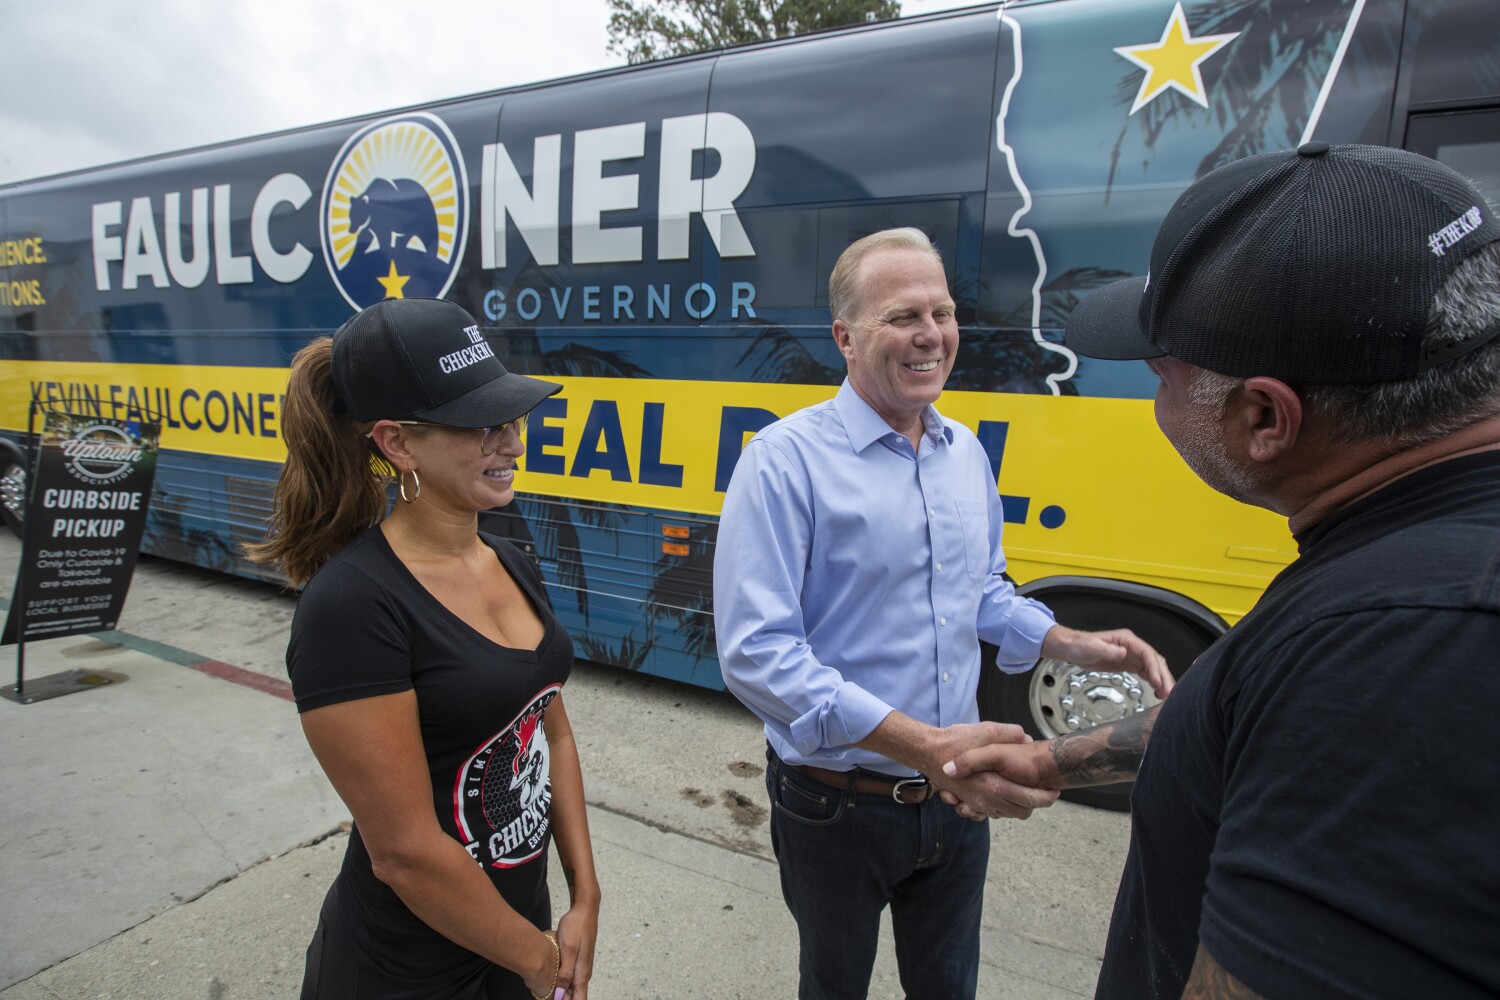 Column: Republican Kevin Faulconer flopped as a candidate for California governor. So why not try again?